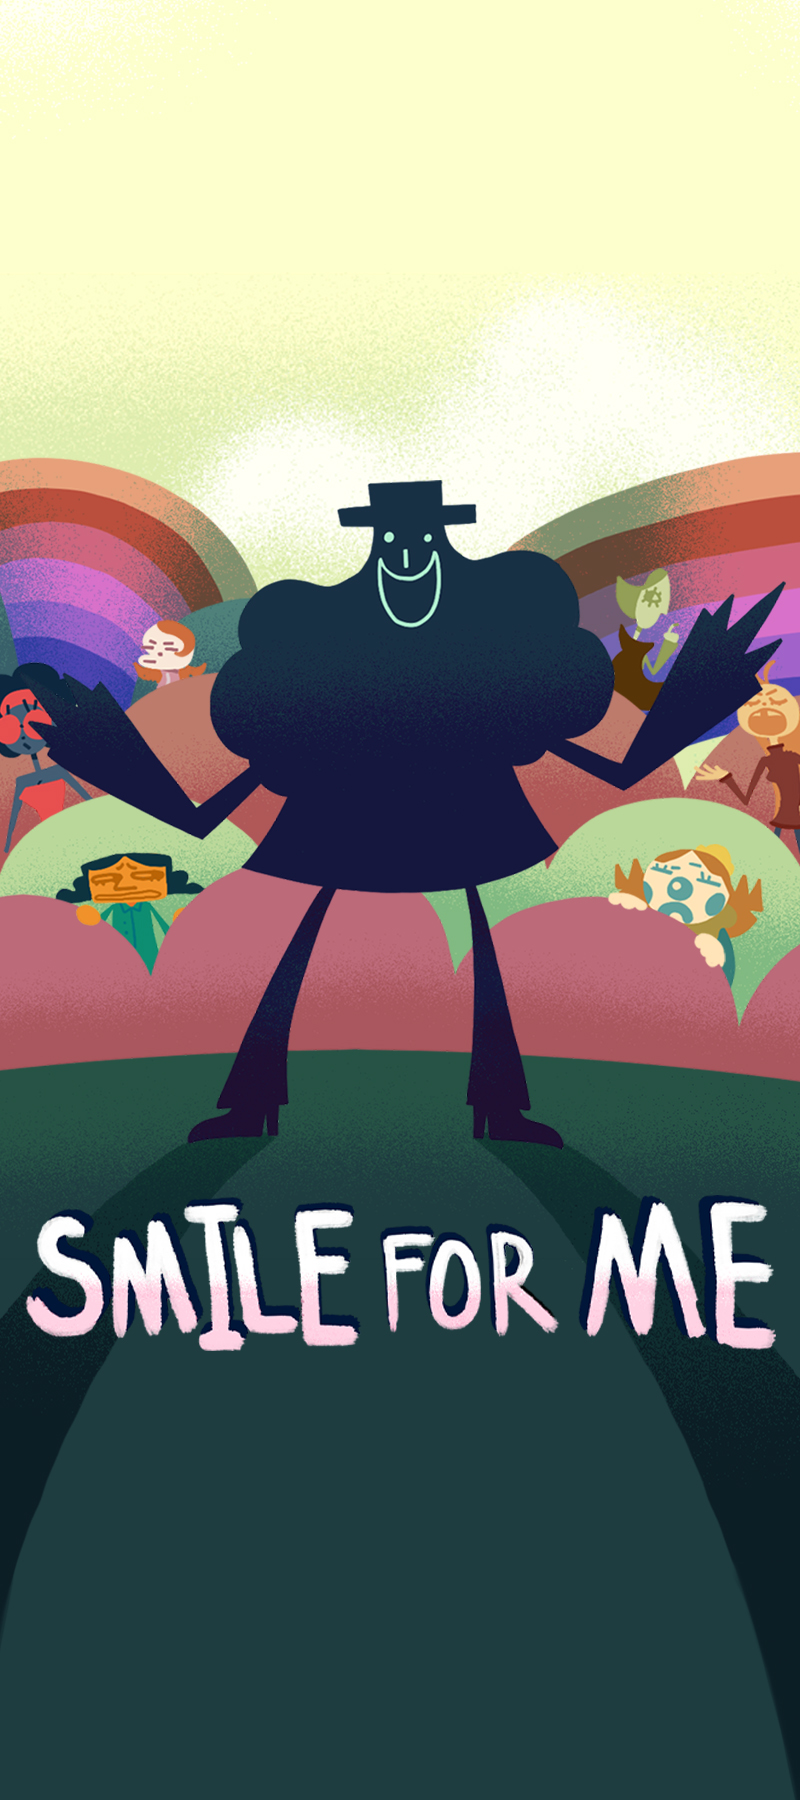 Smile For Me - Artbook – Serenity Forge Store